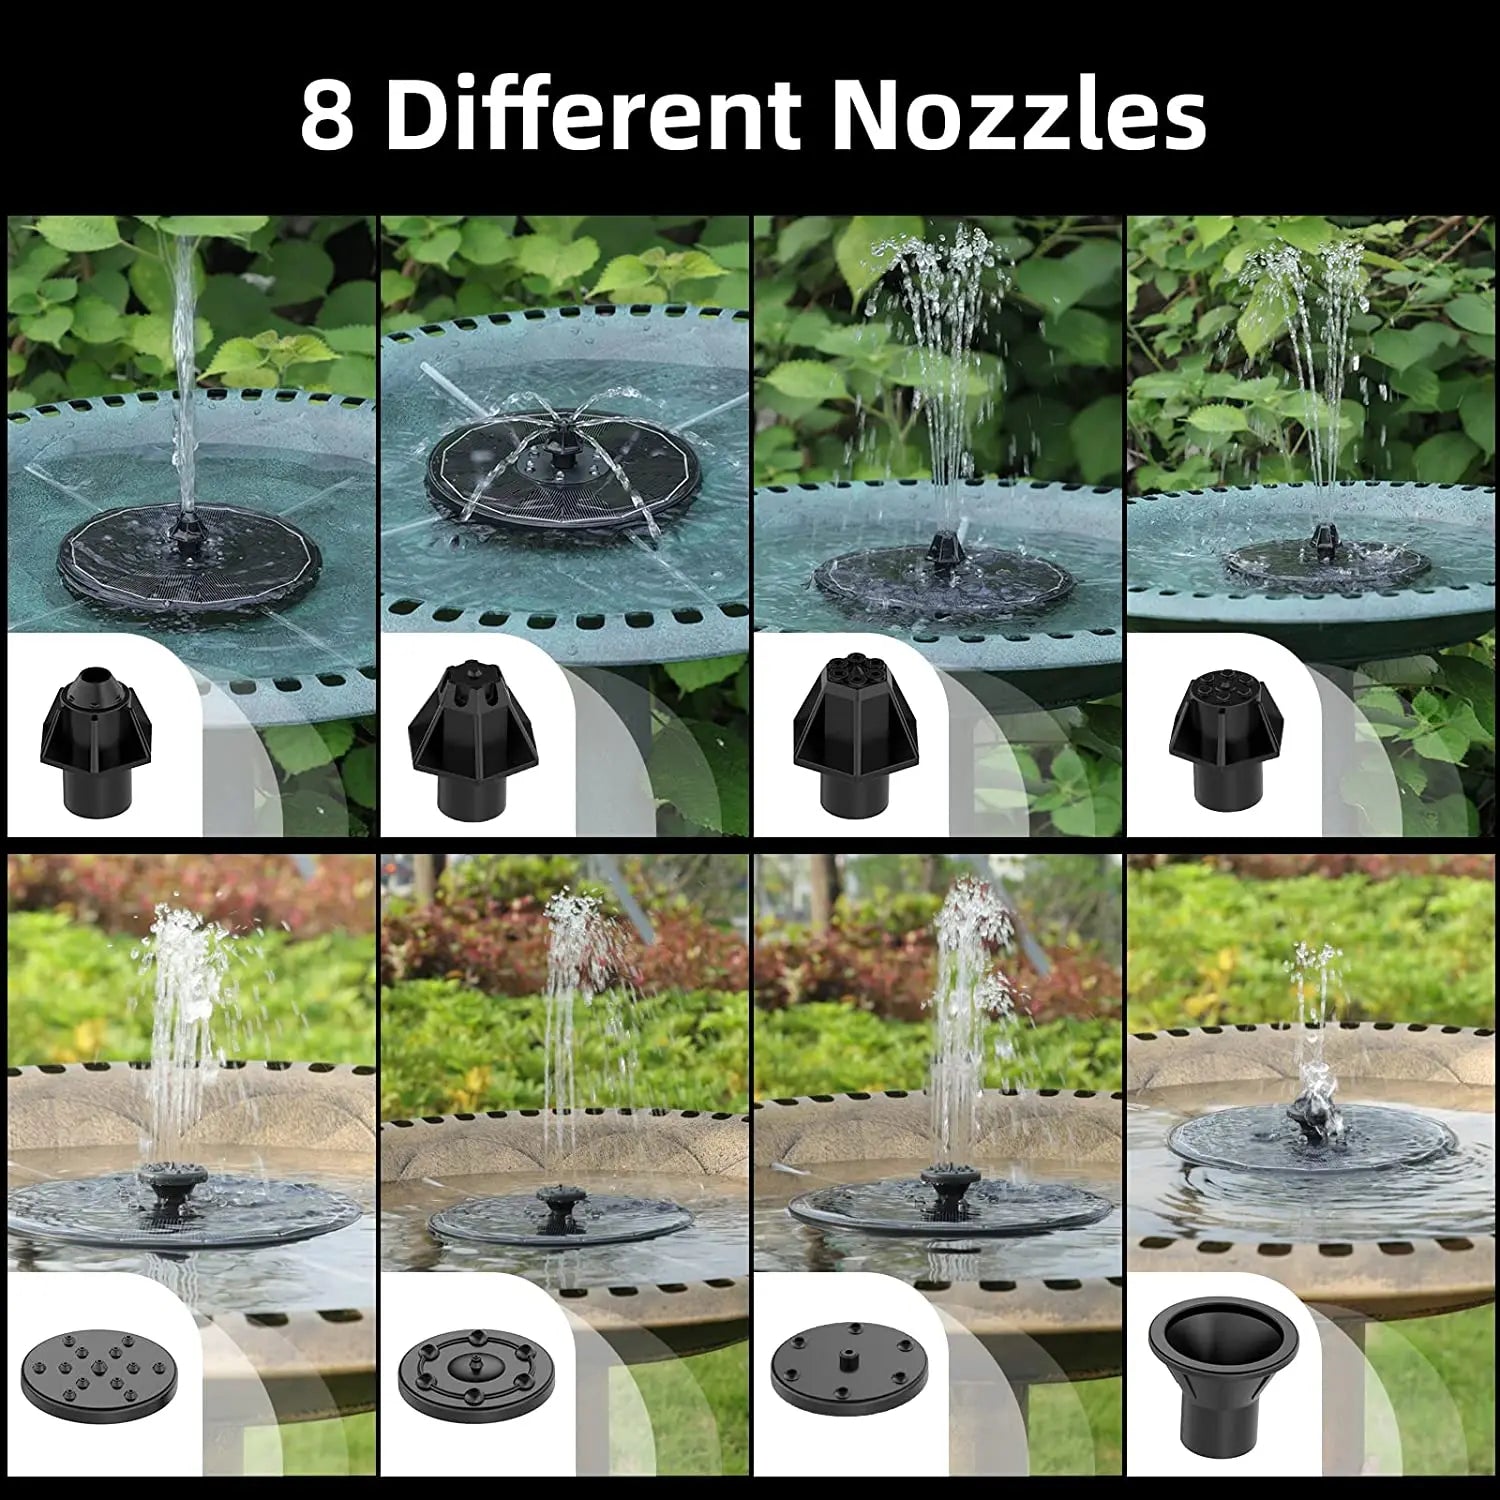 3W Solar Fountain, Solar-powered fountain lights up garden pond with 6 colorful LEDs.